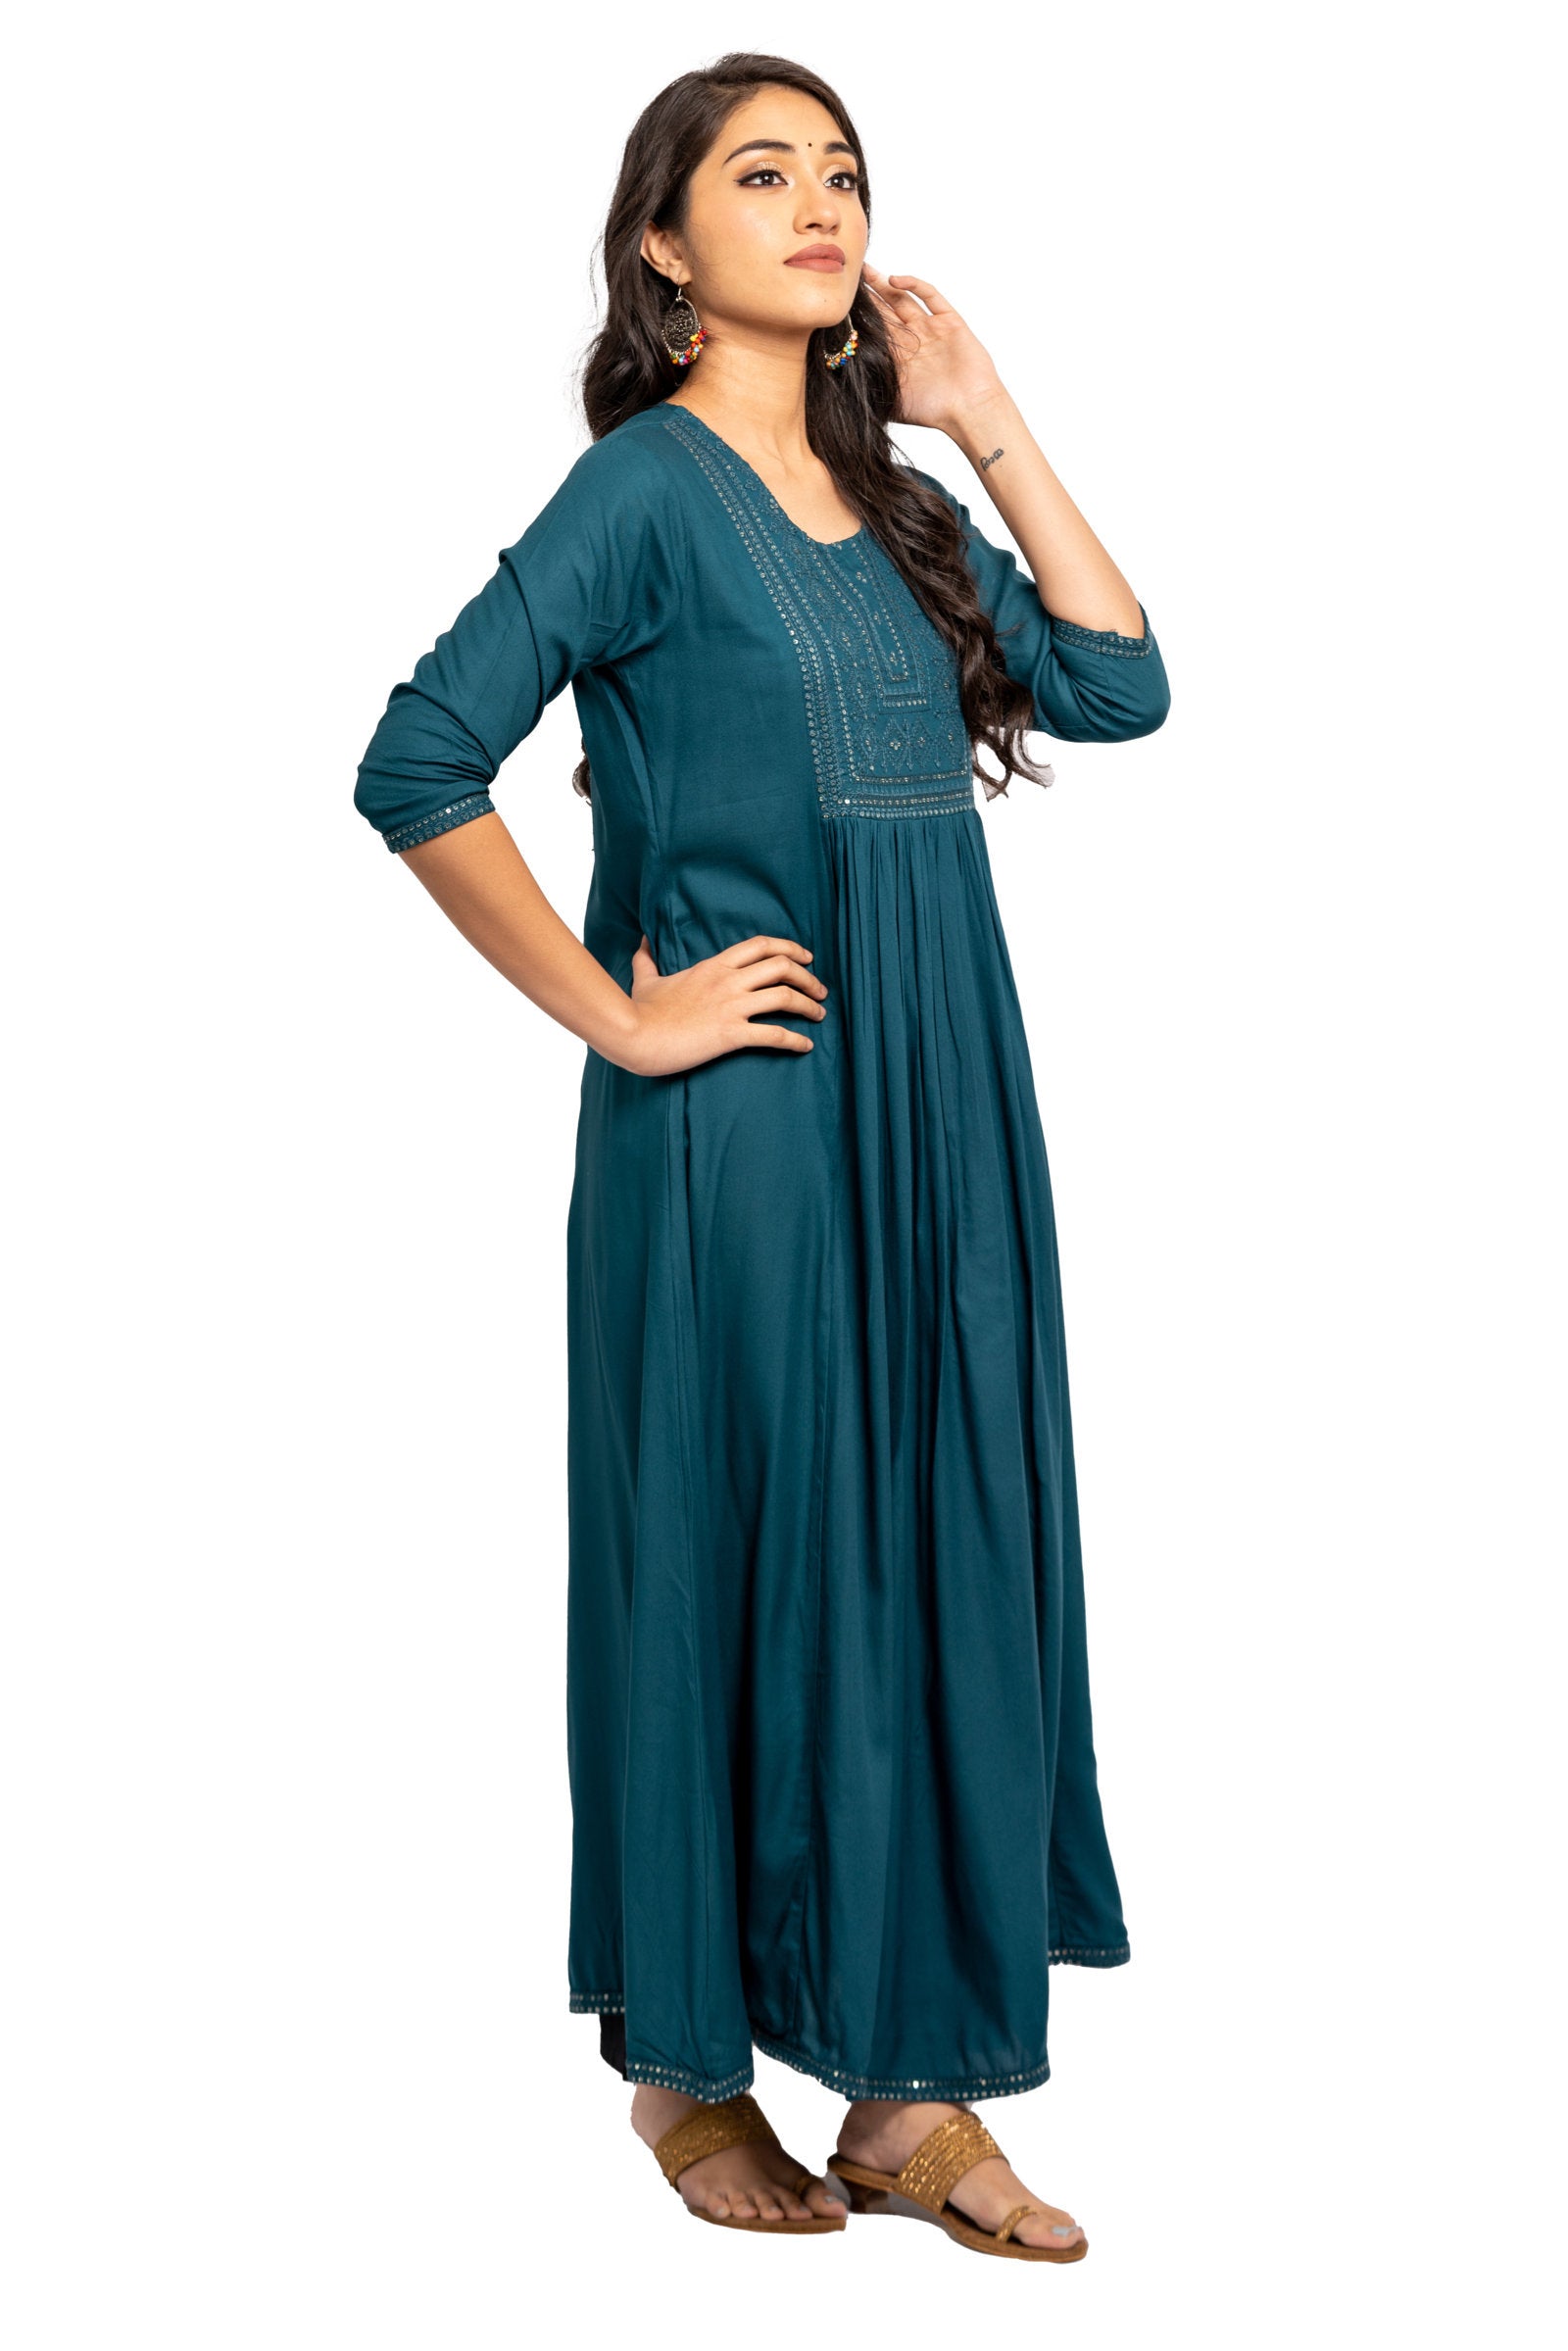 Full Gown - Blue full gown with rich embroidery in the front and gather detail. 3/4th Sleeve with matching embroidery at the tip. Round neck. Flared hemline deriving from the gather detail with matching embroidery. Rayon material.